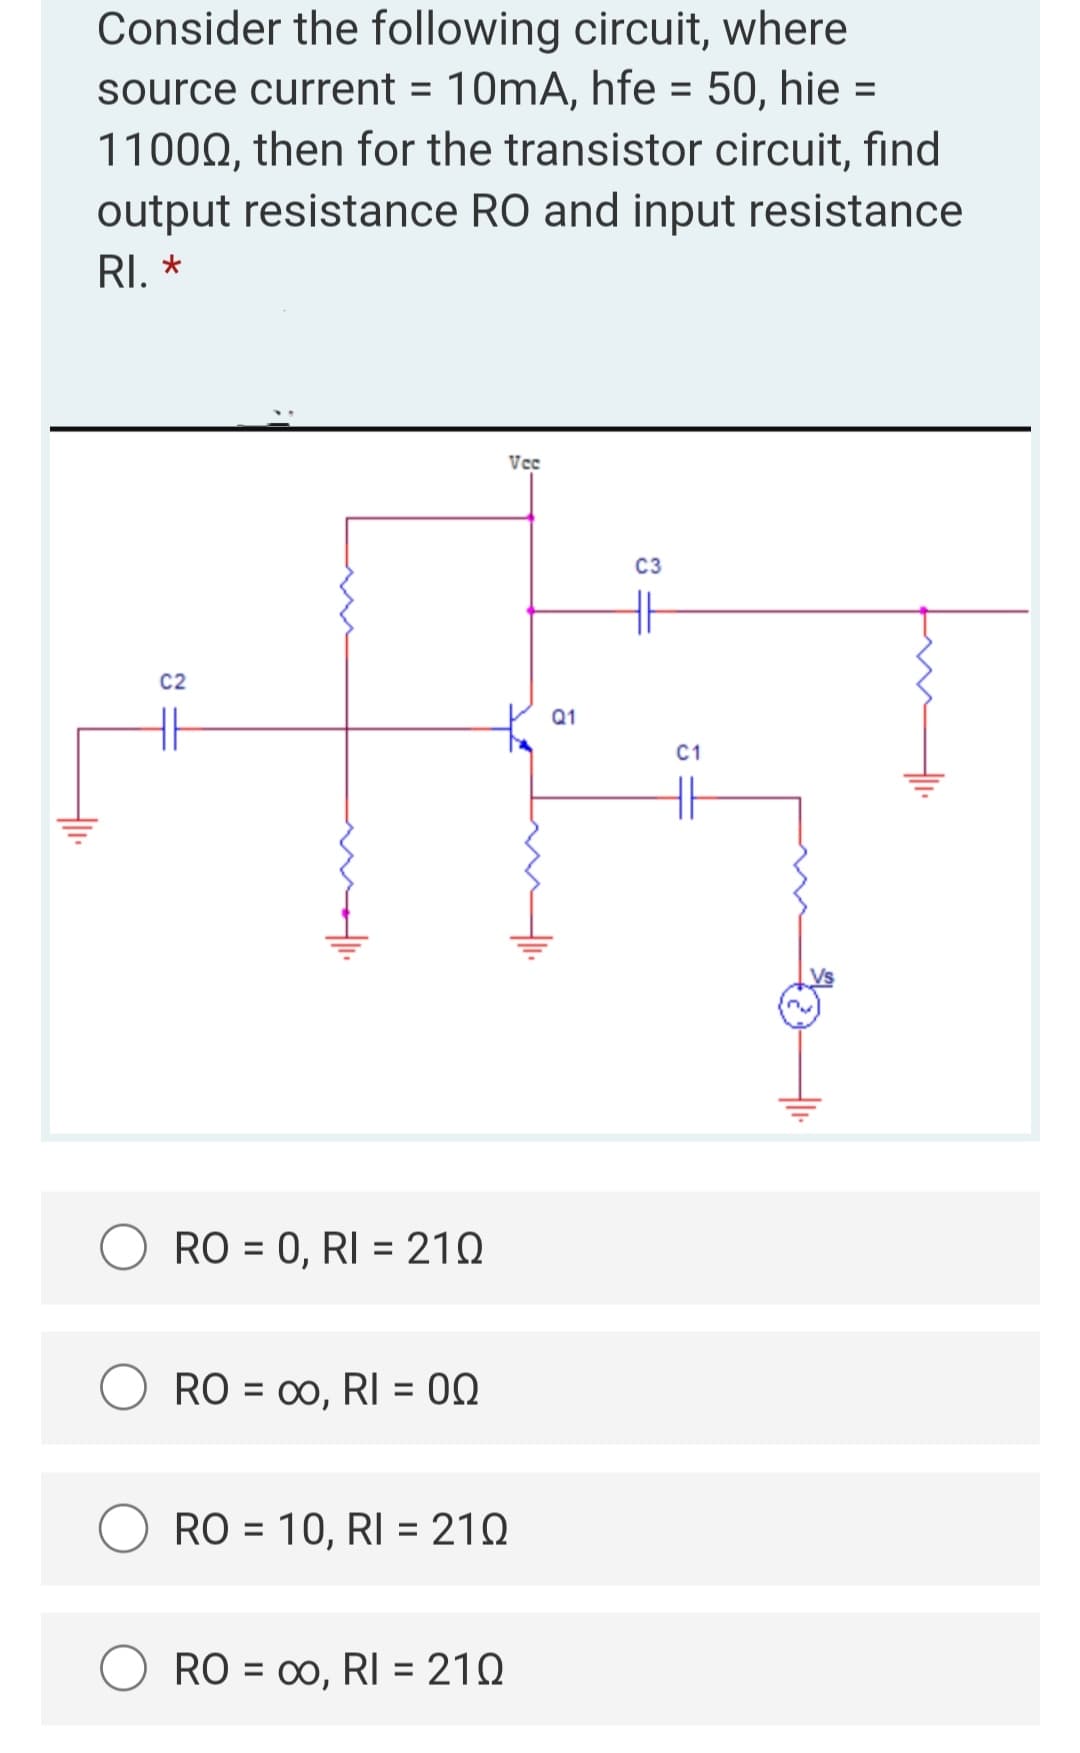 Consider the following circuit, where
source current = 10mA, hfe = 50, hie =
11000, then for the transistor circuit, find
output resistance RO and input resistance
RI. *
Vo
C2
HH
+11.
Alli
RO= 0, RI = 210
RO = ∞o, RI = 00
RO = 10, RI = 210
RO = ∞o, RI = 210
00,
Q1
C3
C1
H₁.